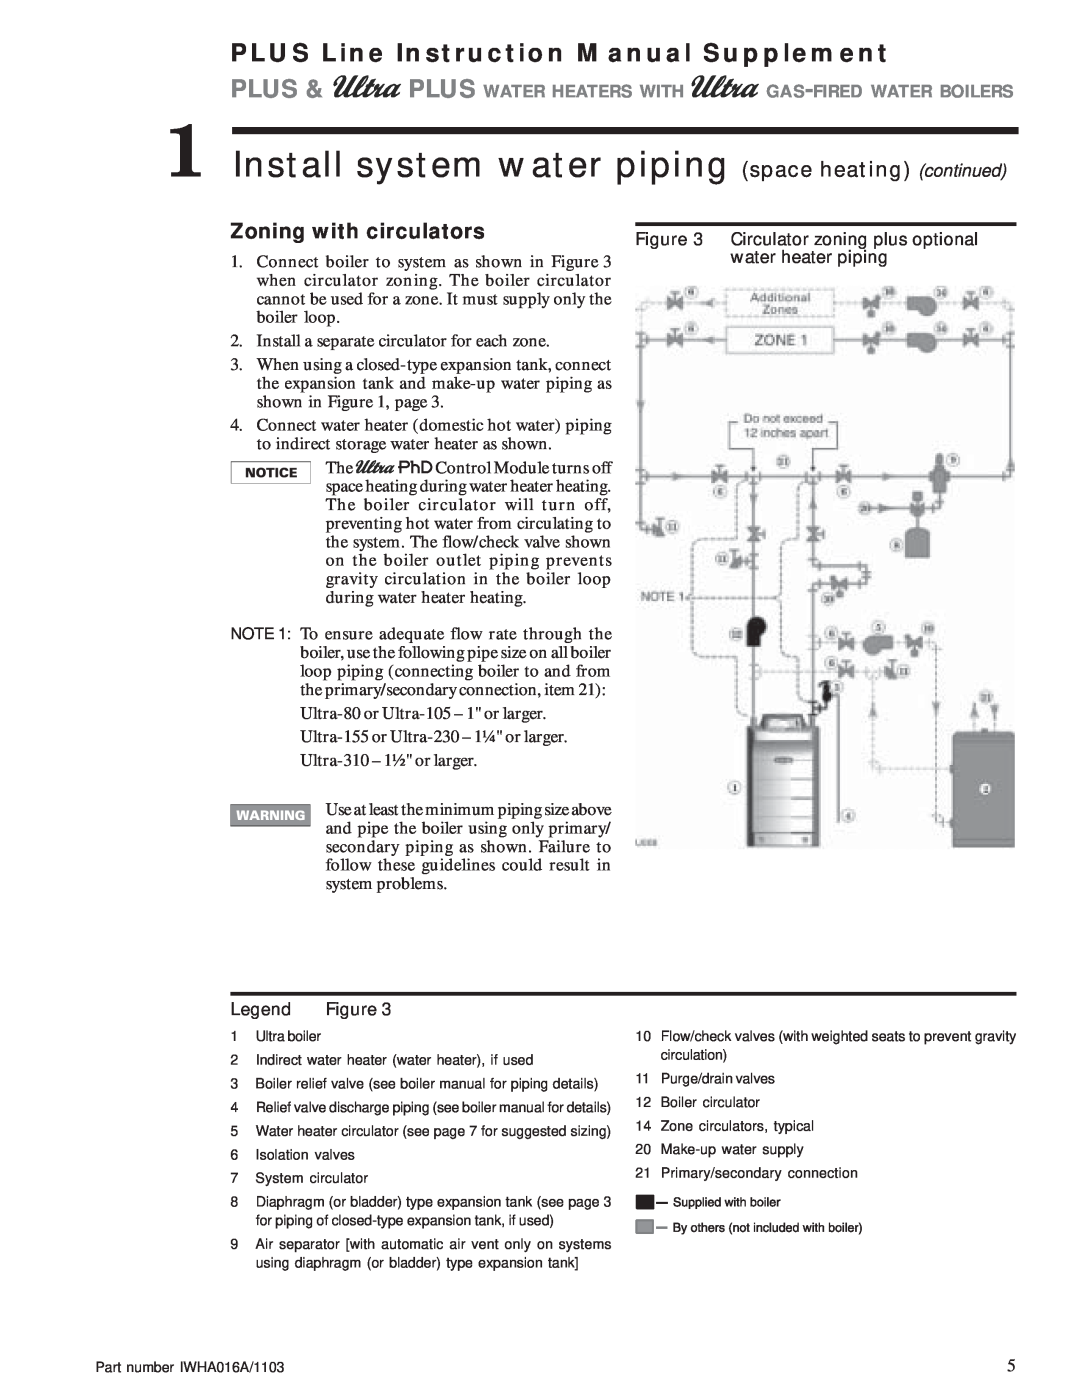 Weil-McLain Electric Water Heater Zoning with circulators, Install system water piping space heating continued 